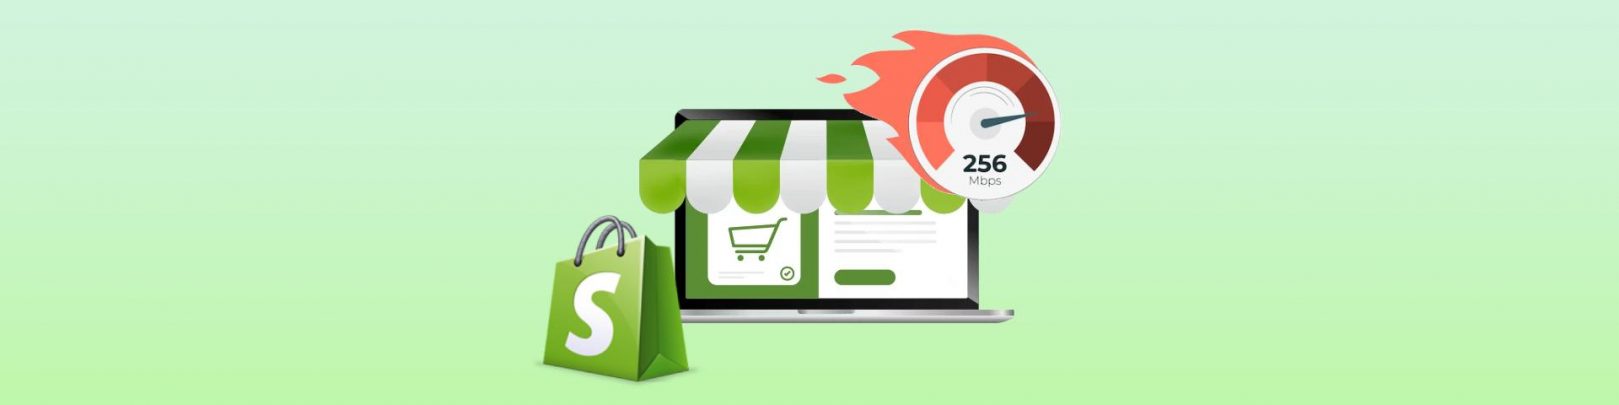 Shopify SPeed optimization step by step guide